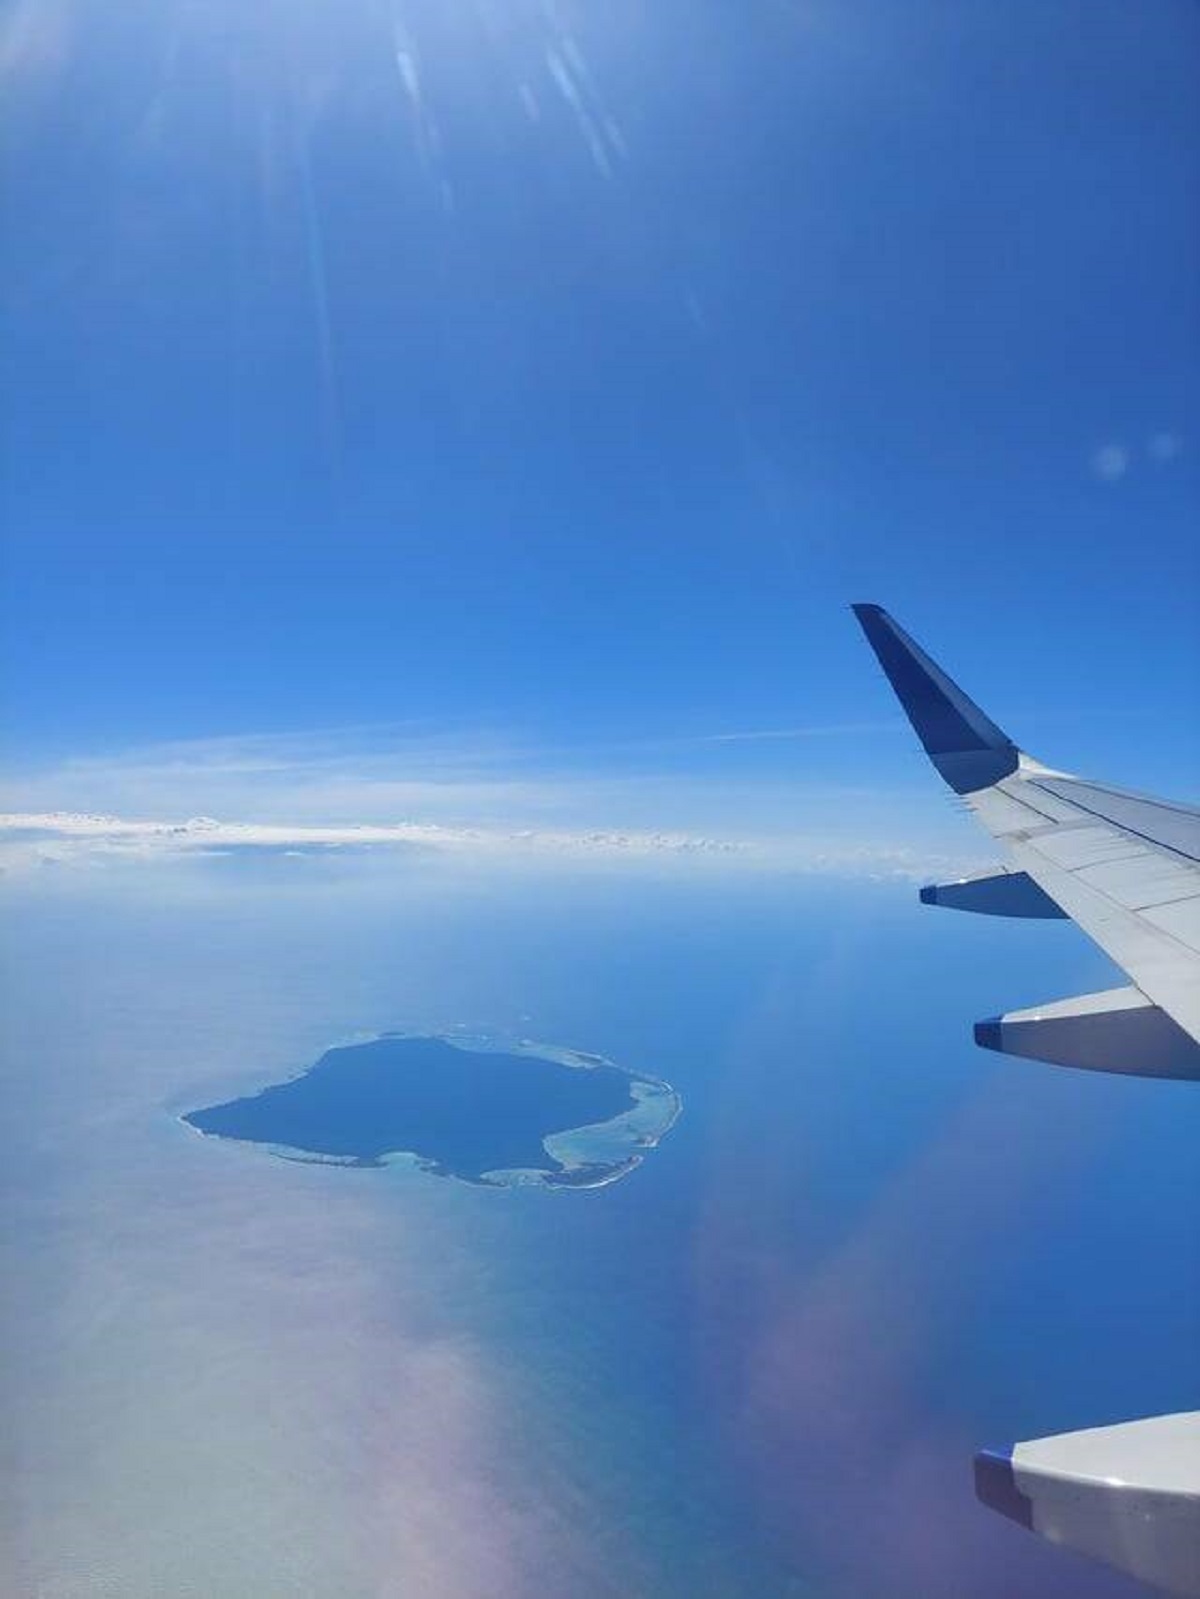 "Saw the North Sentinel Island while on the return flight from Port Blair, South Andaman"